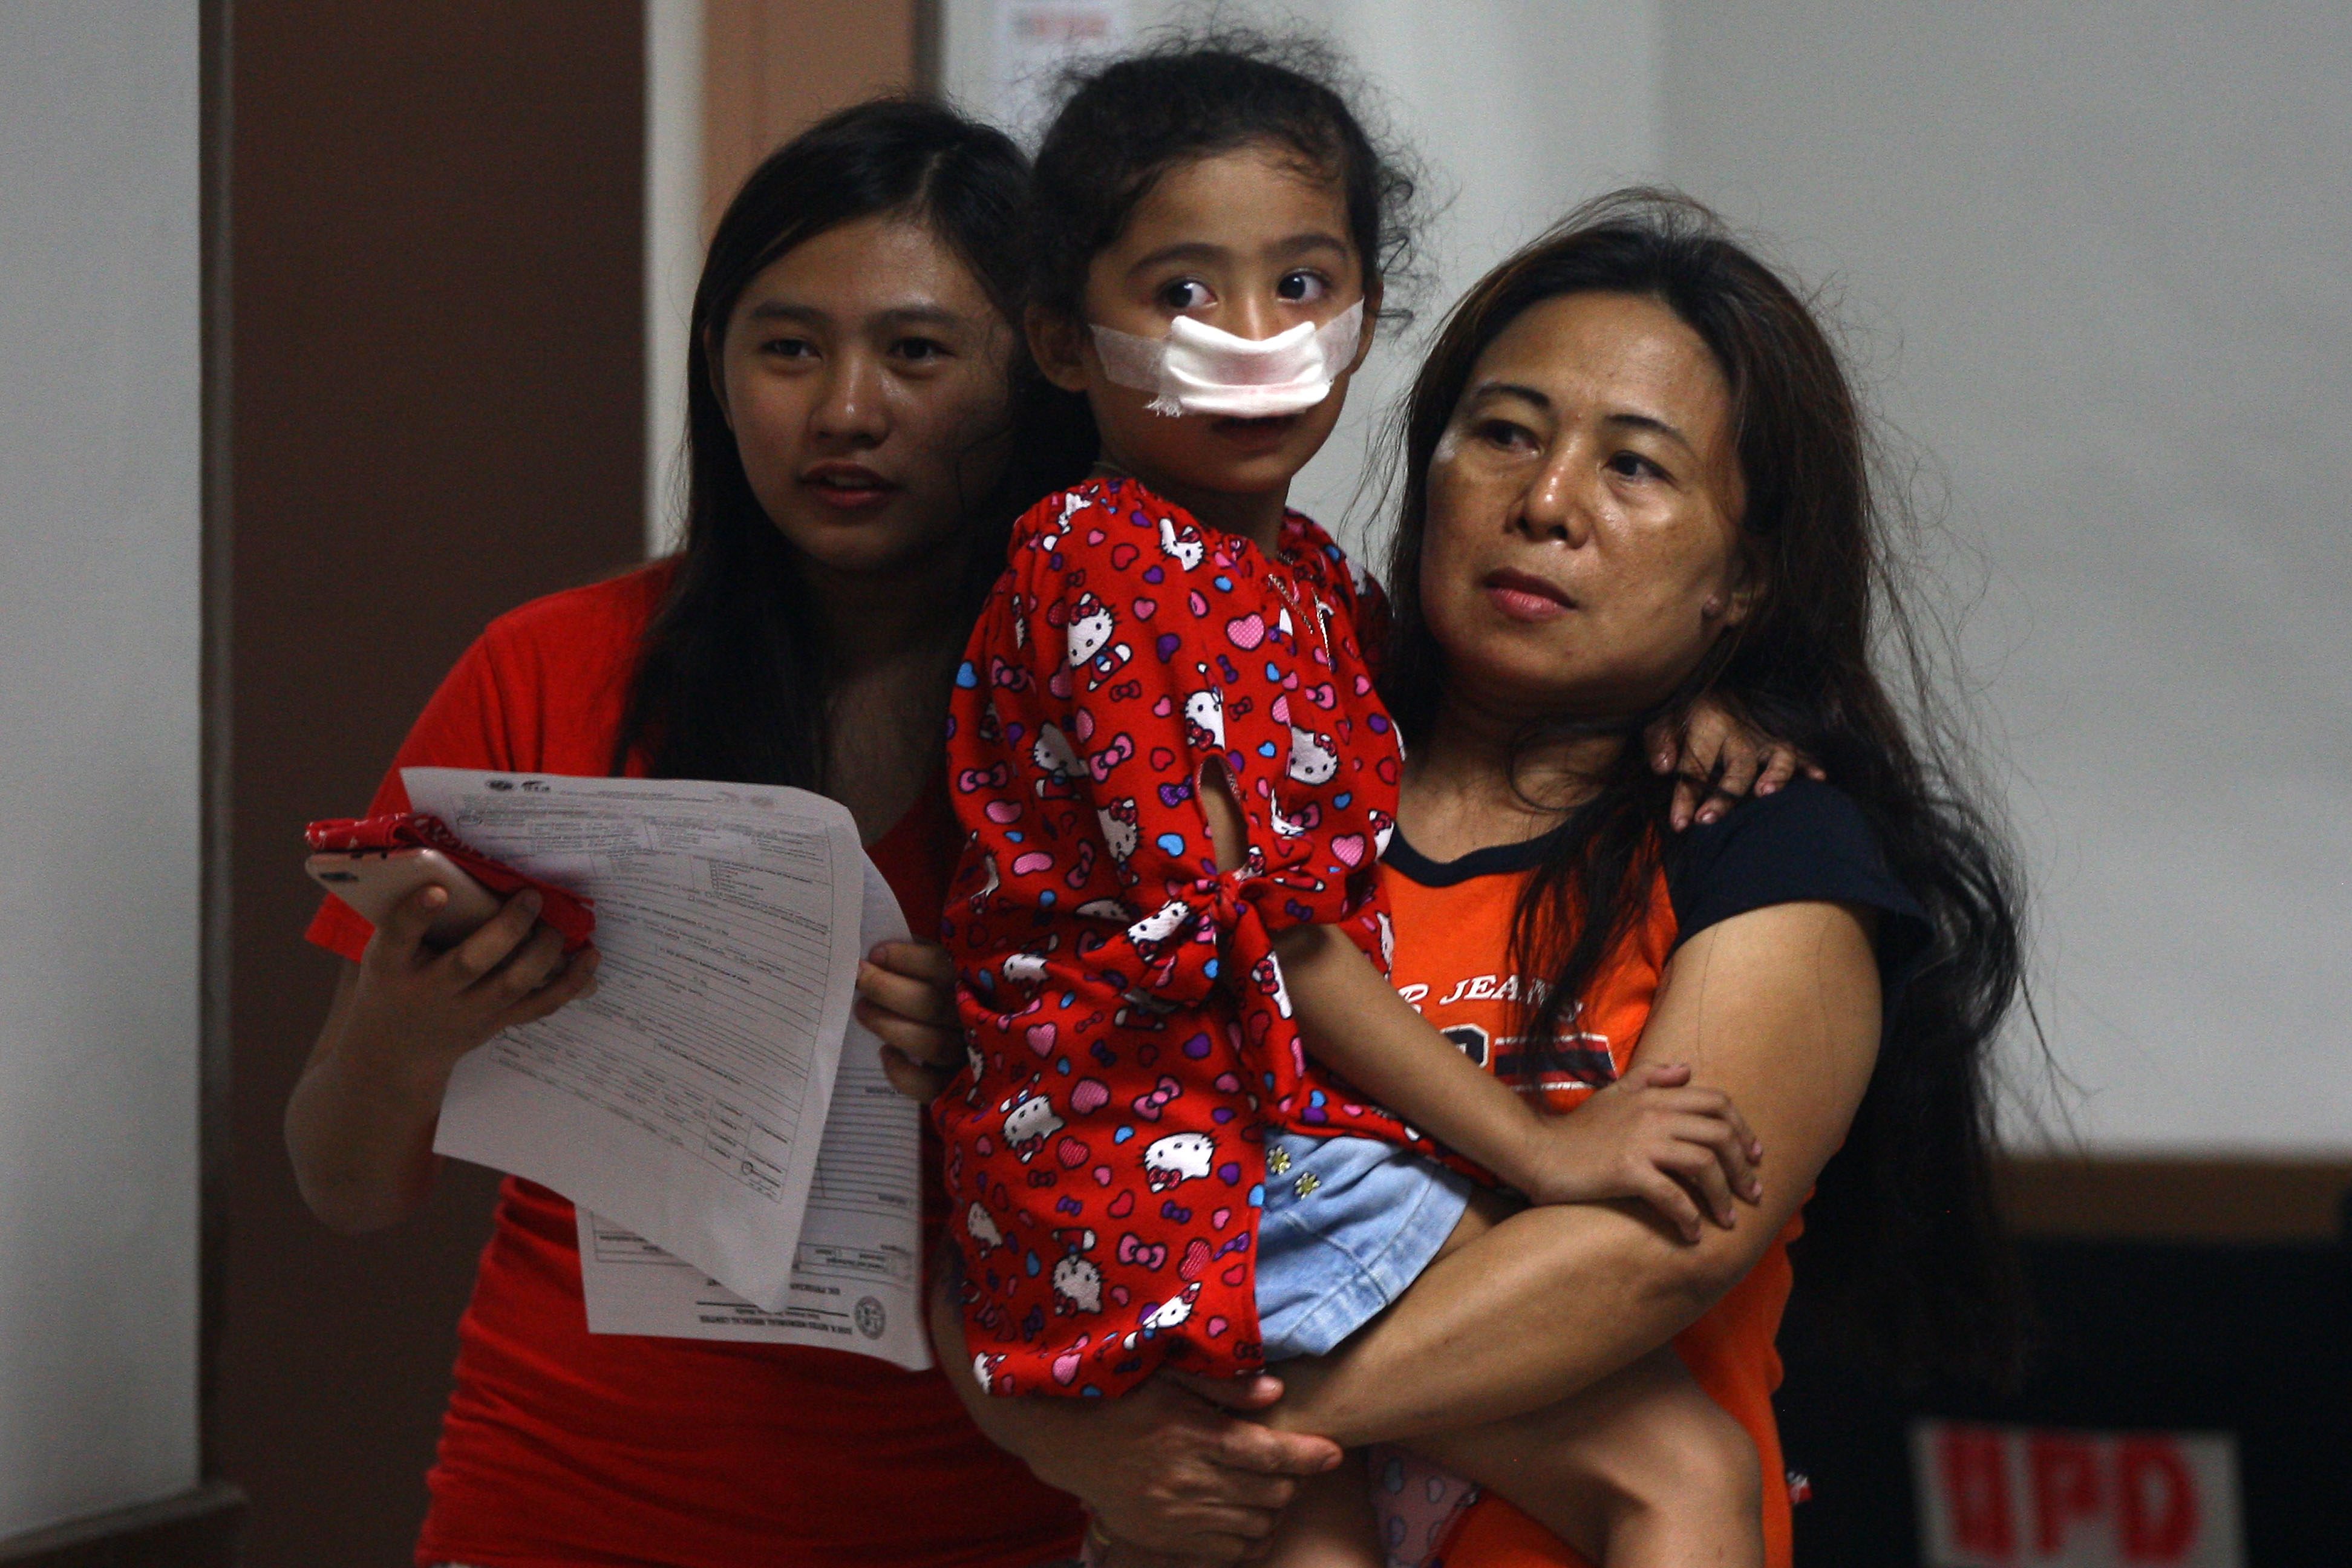 FIRECRACKER INJURIES. Doctors and nurses at the Jose Reyes Memorial Medical Centre in Manila attend to victims of firecrackers during the New Year revelry on Sunday, January 1, 2017 